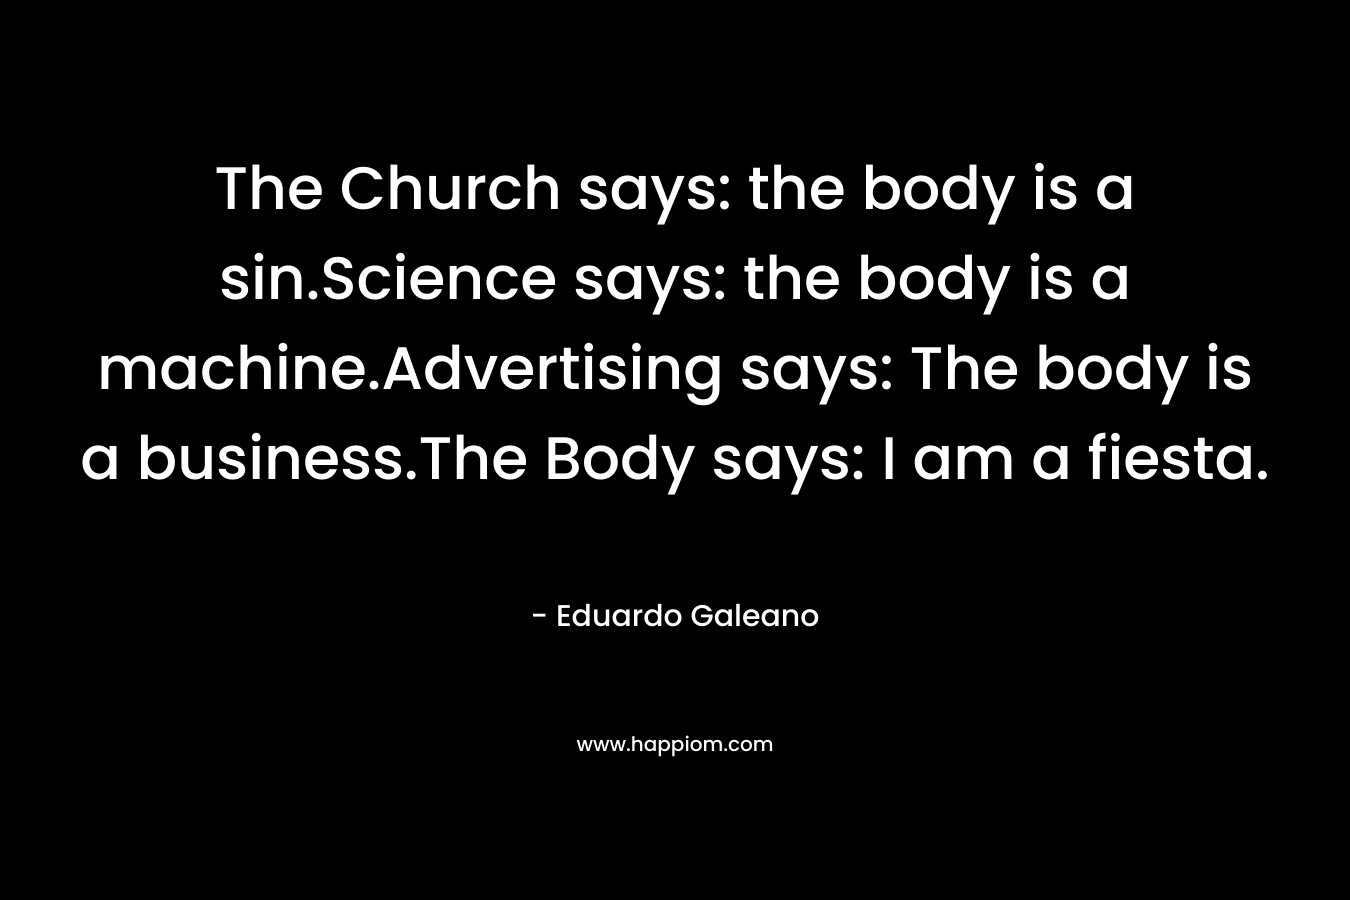 The Church says: the body is a sin.Science says: the body is a machine.Advertising says: The body is a business.The Body says: I am a fiesta.